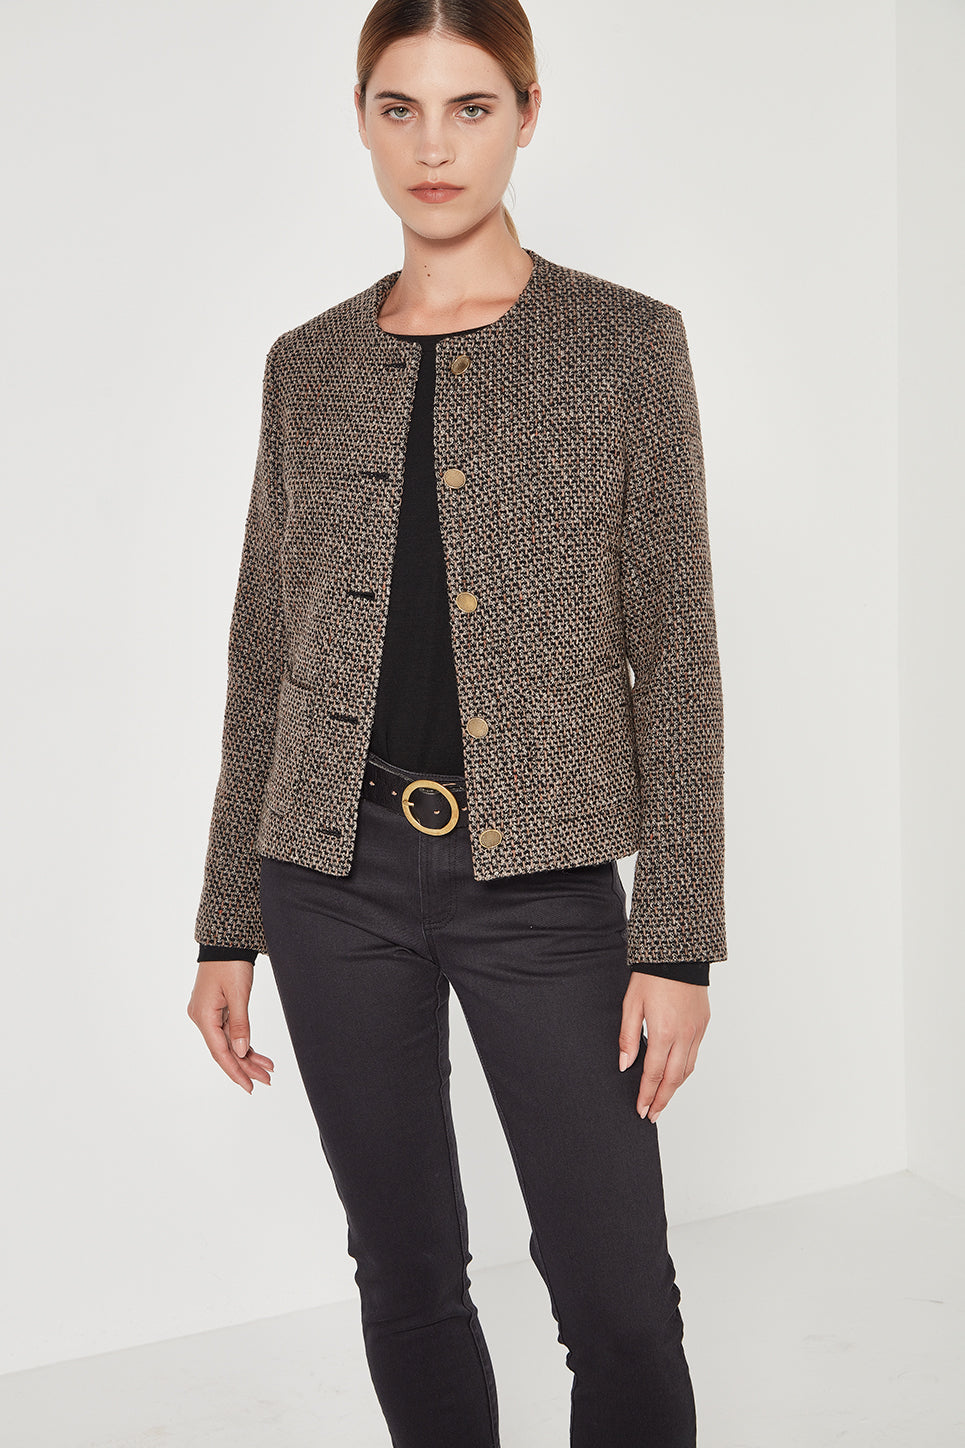 The Gabrielle Jacket in Black/Russet